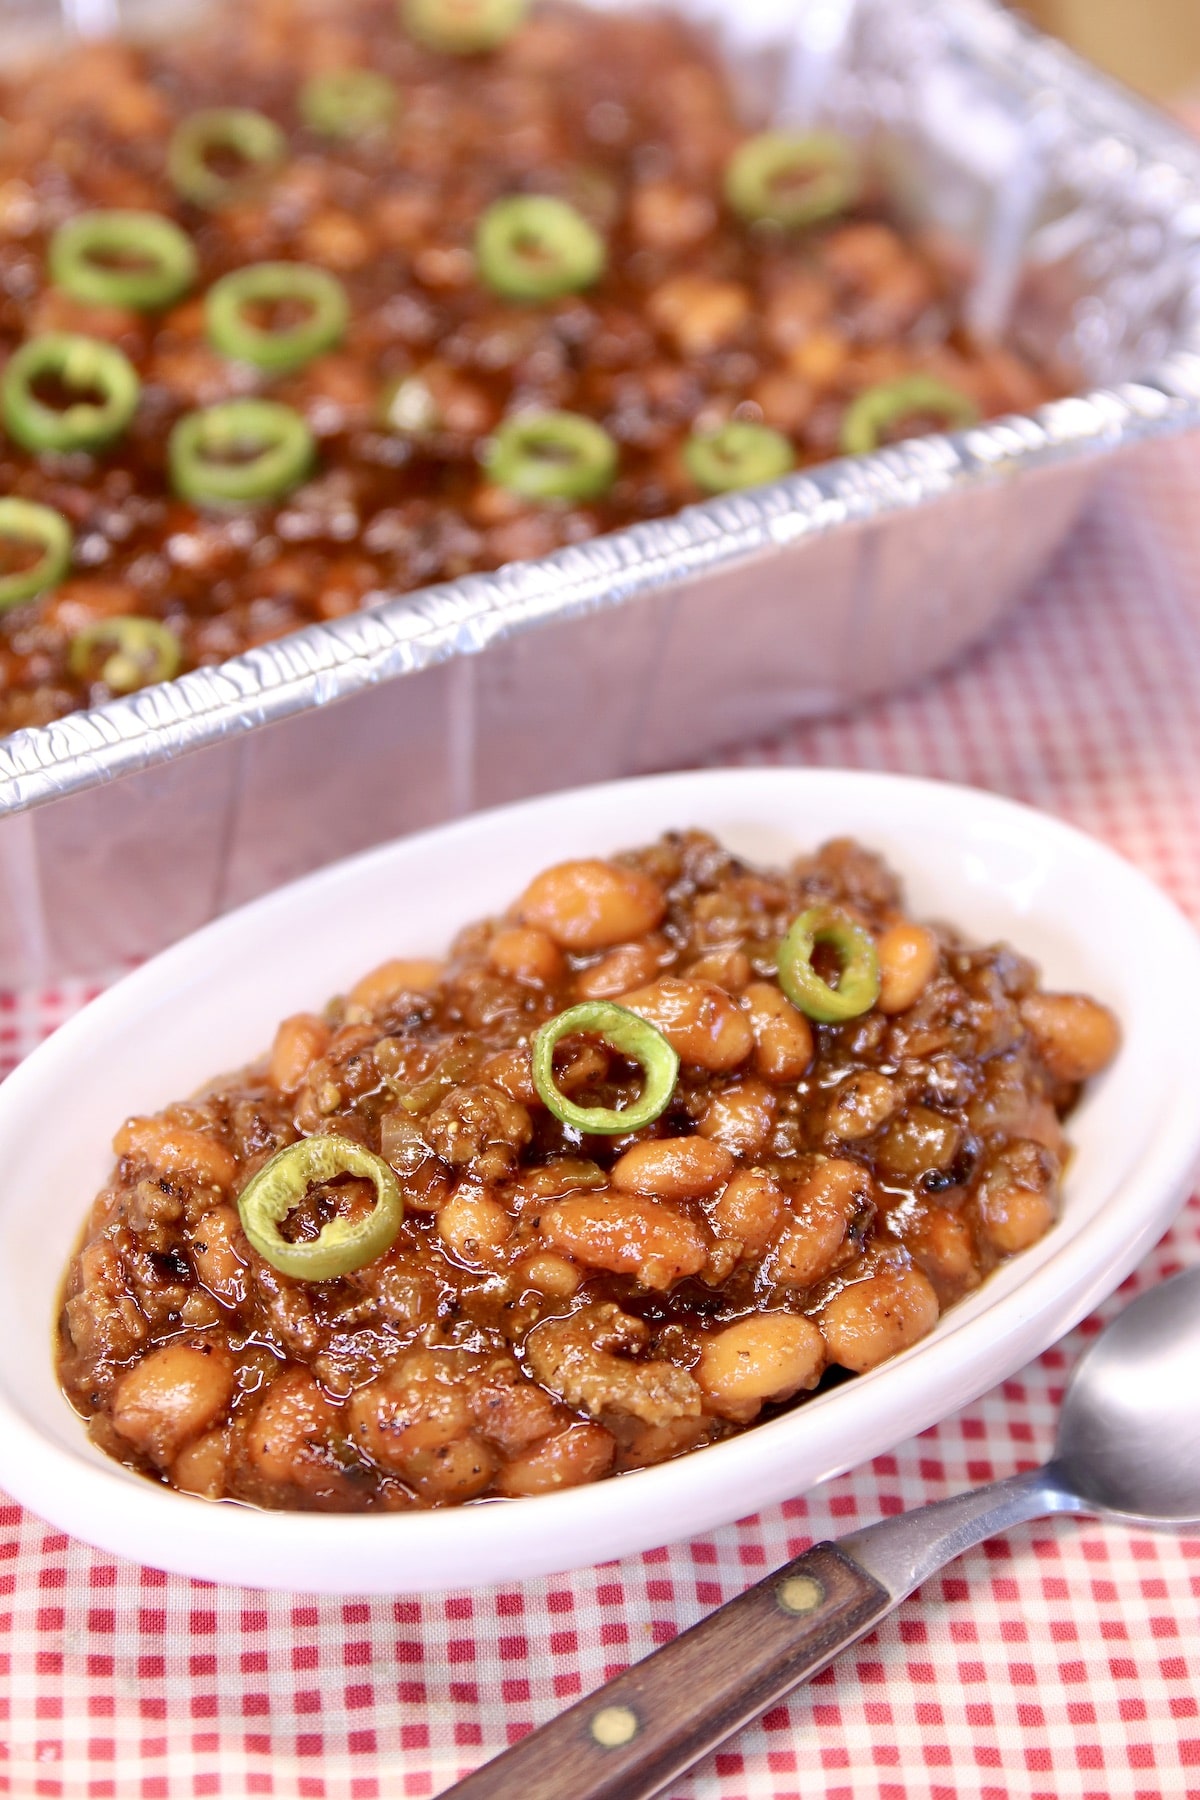 BBQ Cowboy Beans in a dish with pan in background.